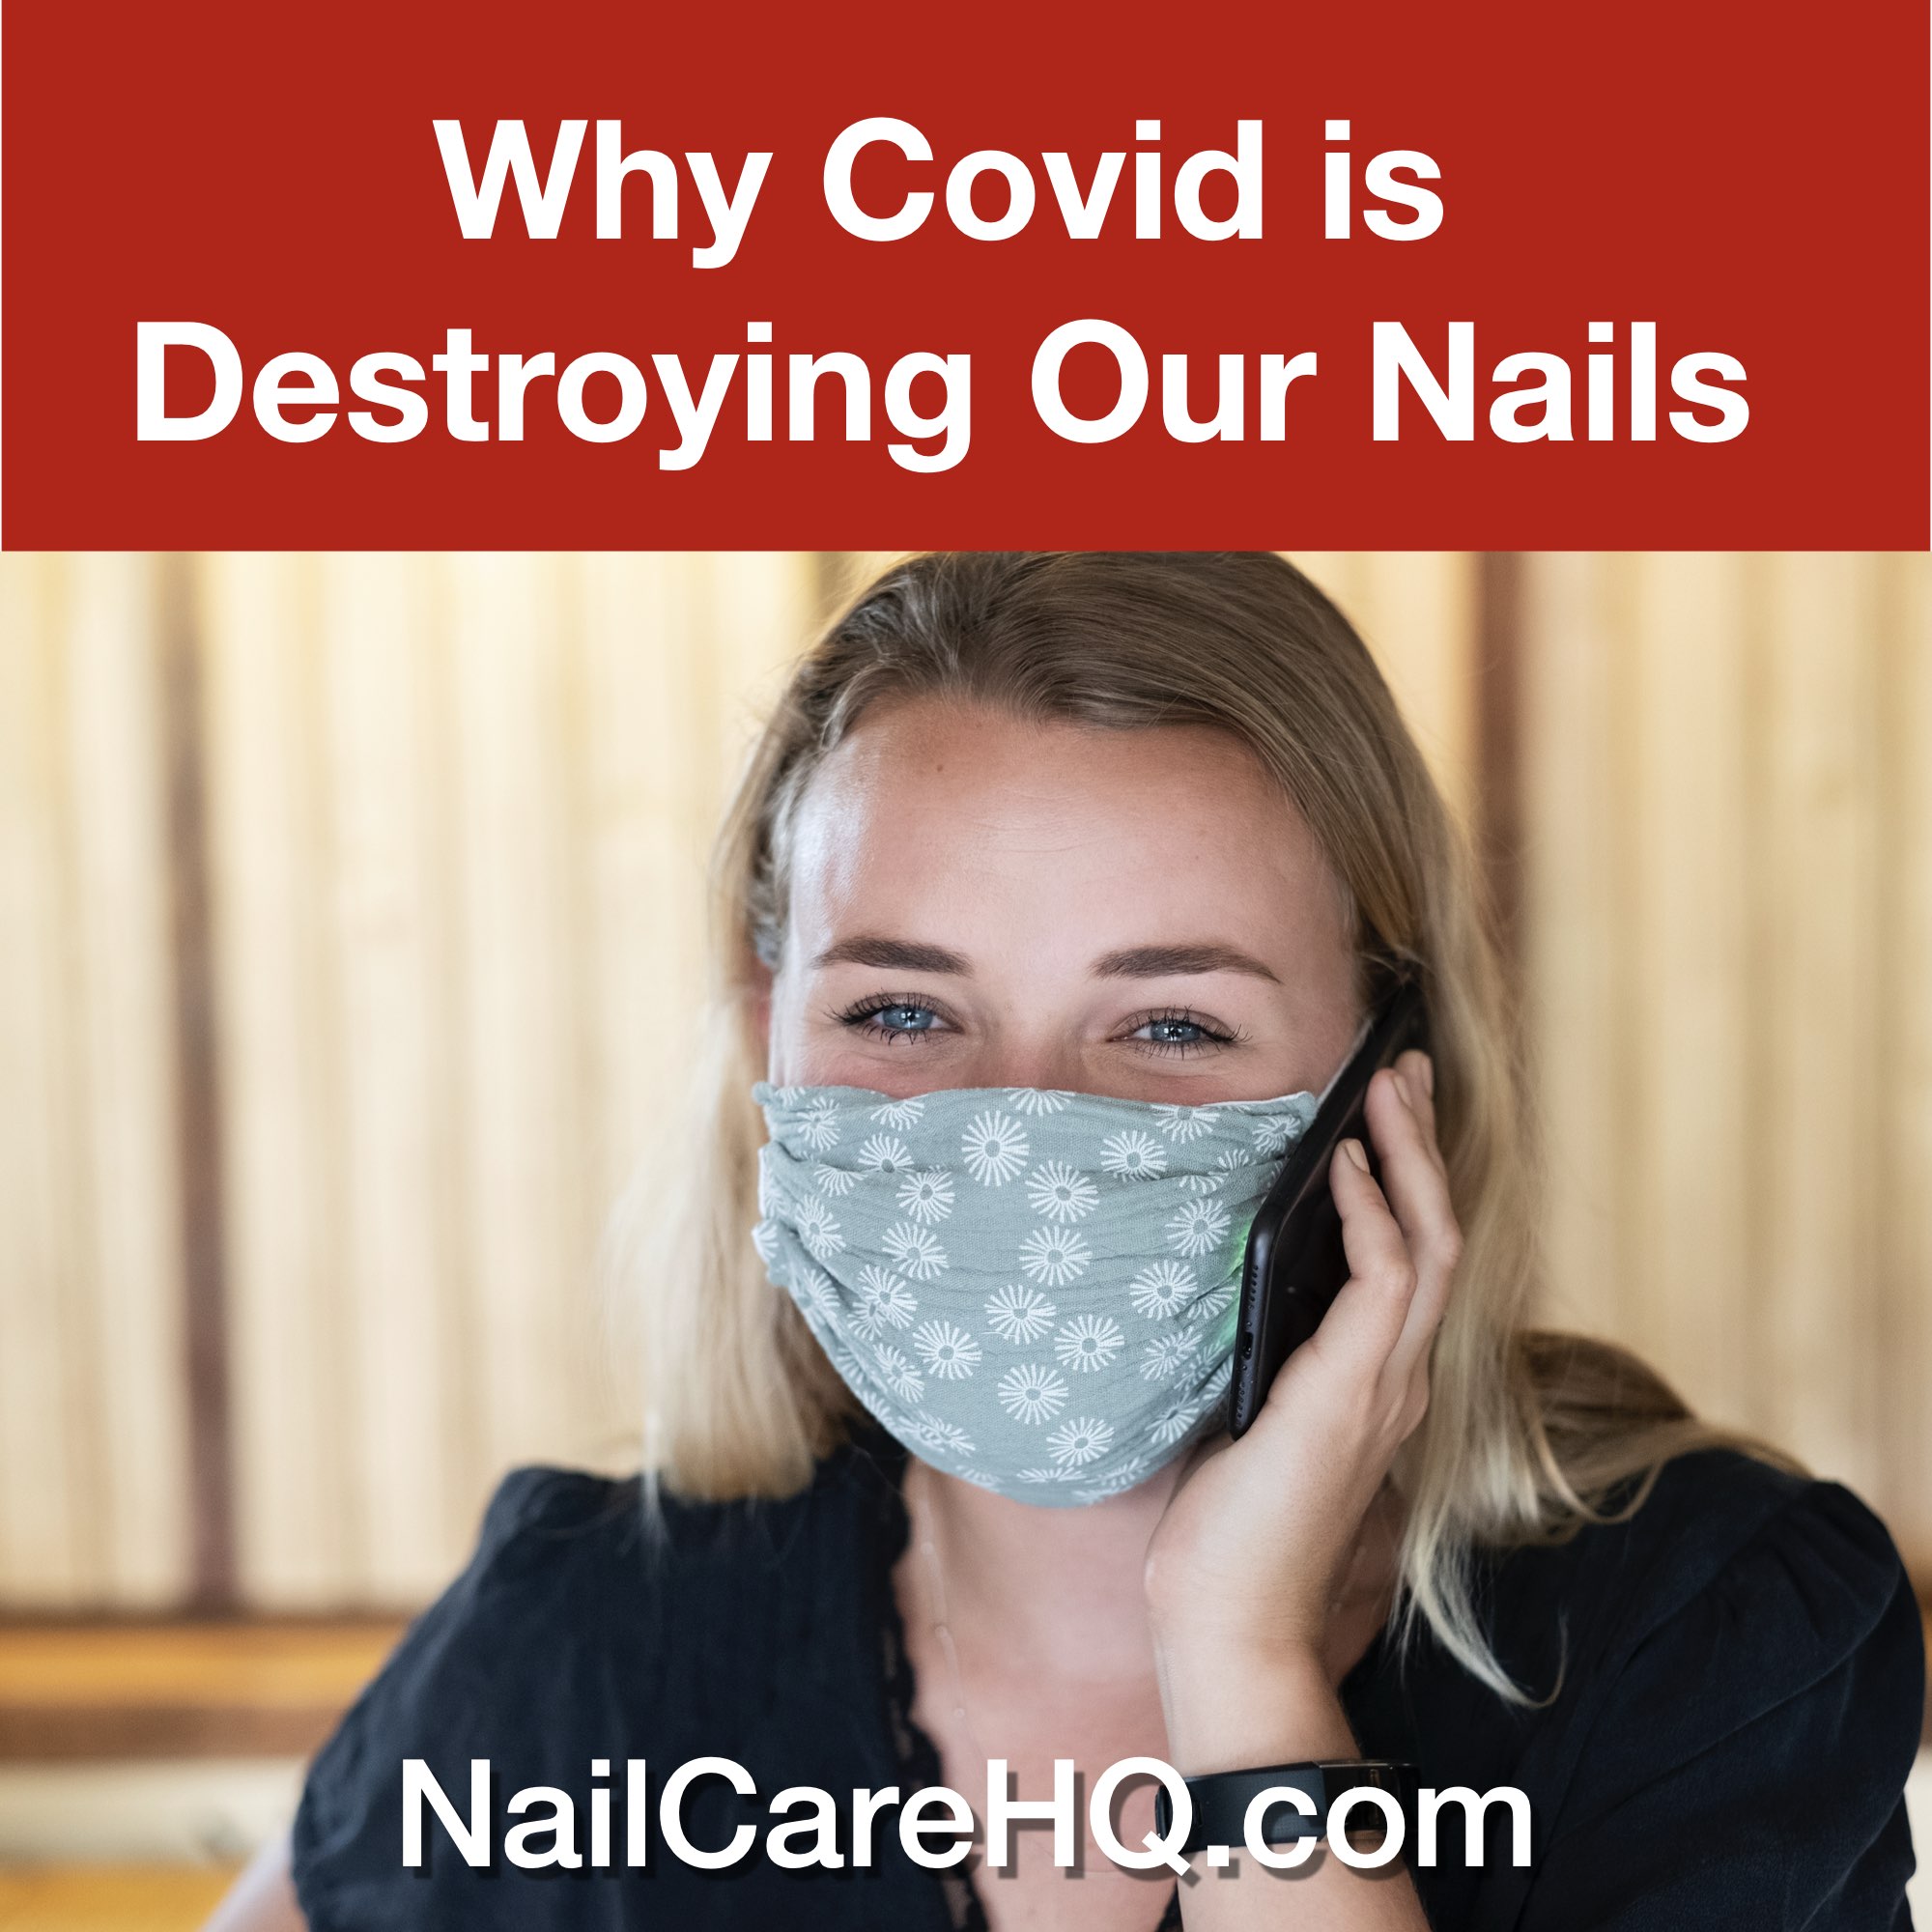 Why the Covid Pandemic is Destroying Our Nails